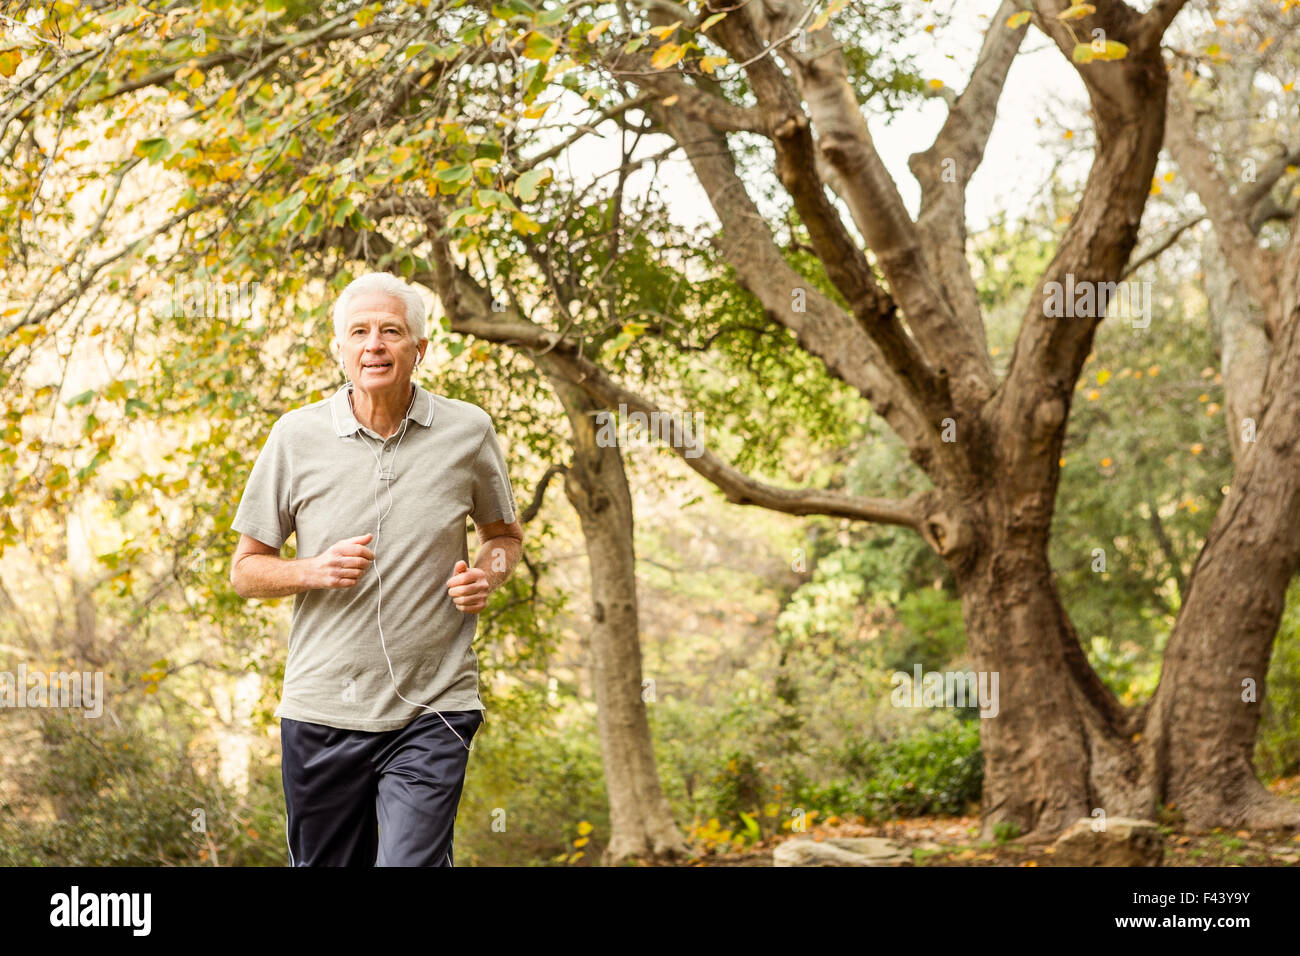 Senior man working out in park Stock Photo